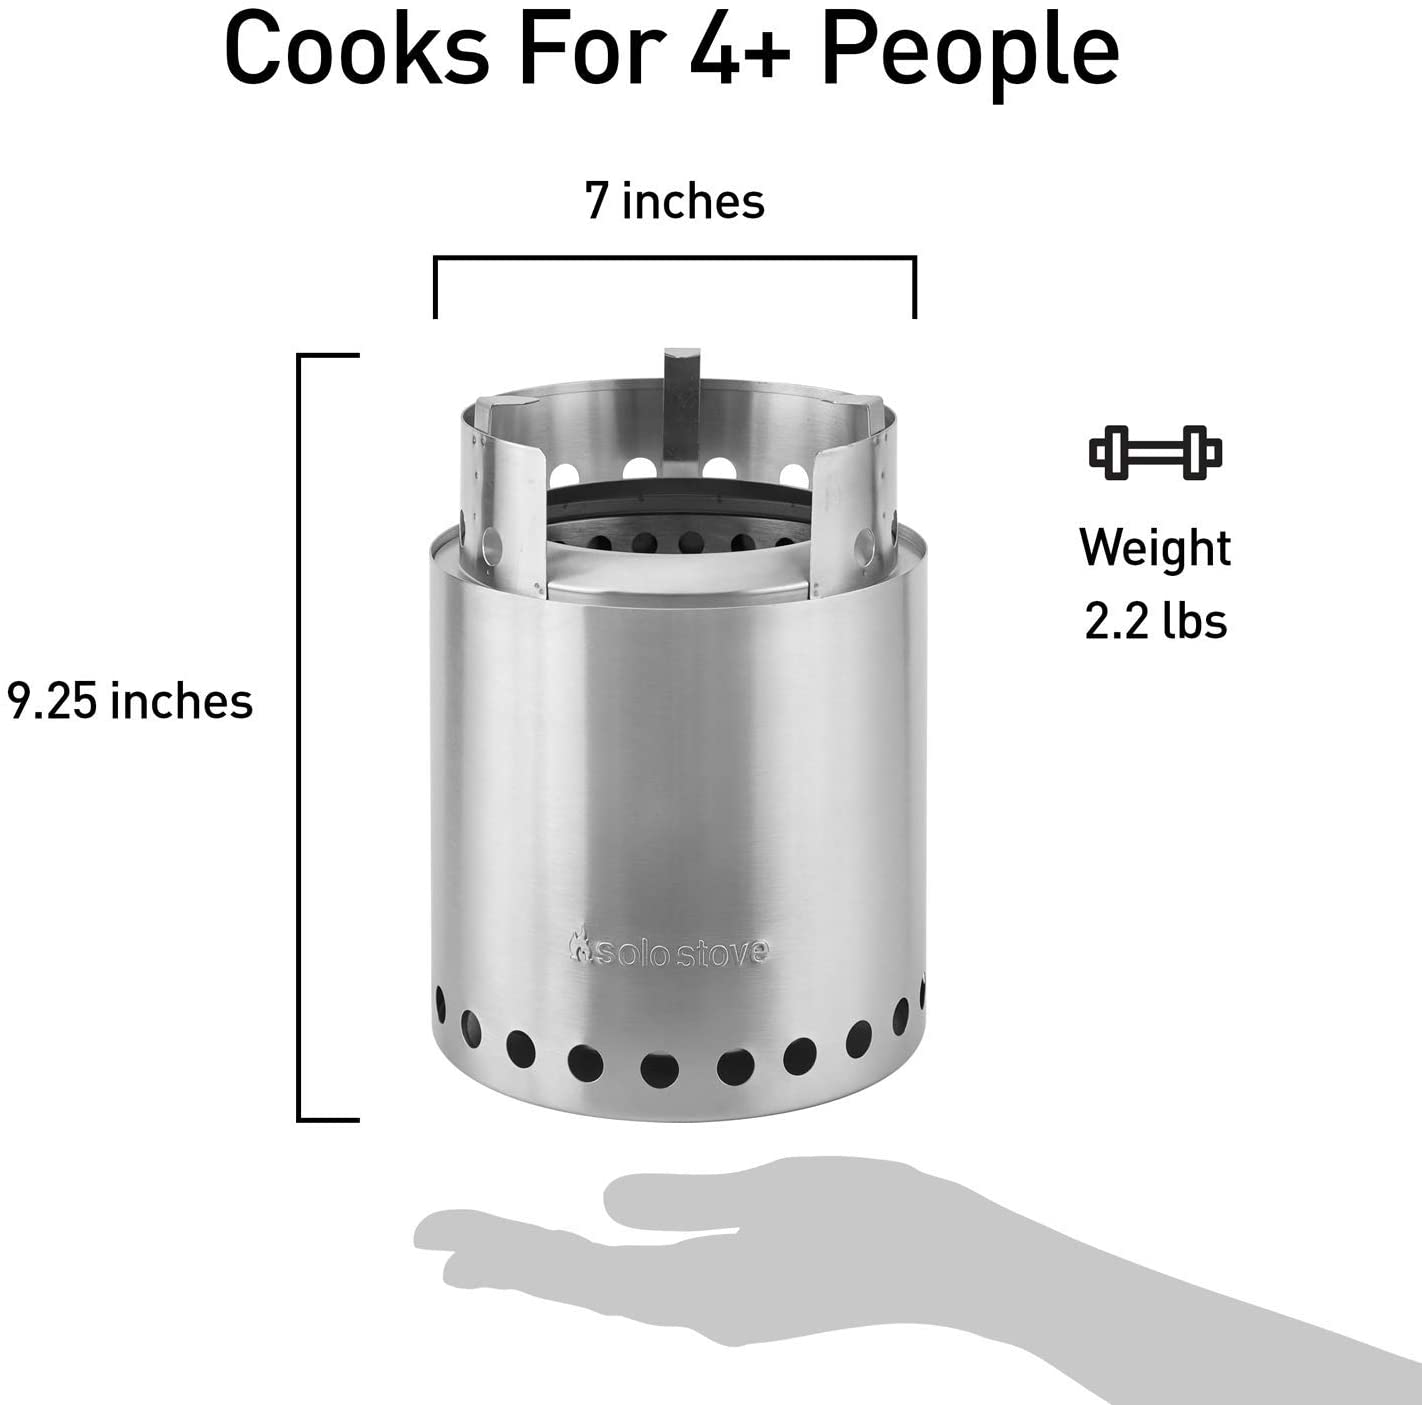 Solo Stove Campfire, Portable Camping Hiking, Backpacking and Survival Stove, Powerful Efficient Wood Burning and Low Smoke, 4+ People, Stainless Steel - image 3 of 8